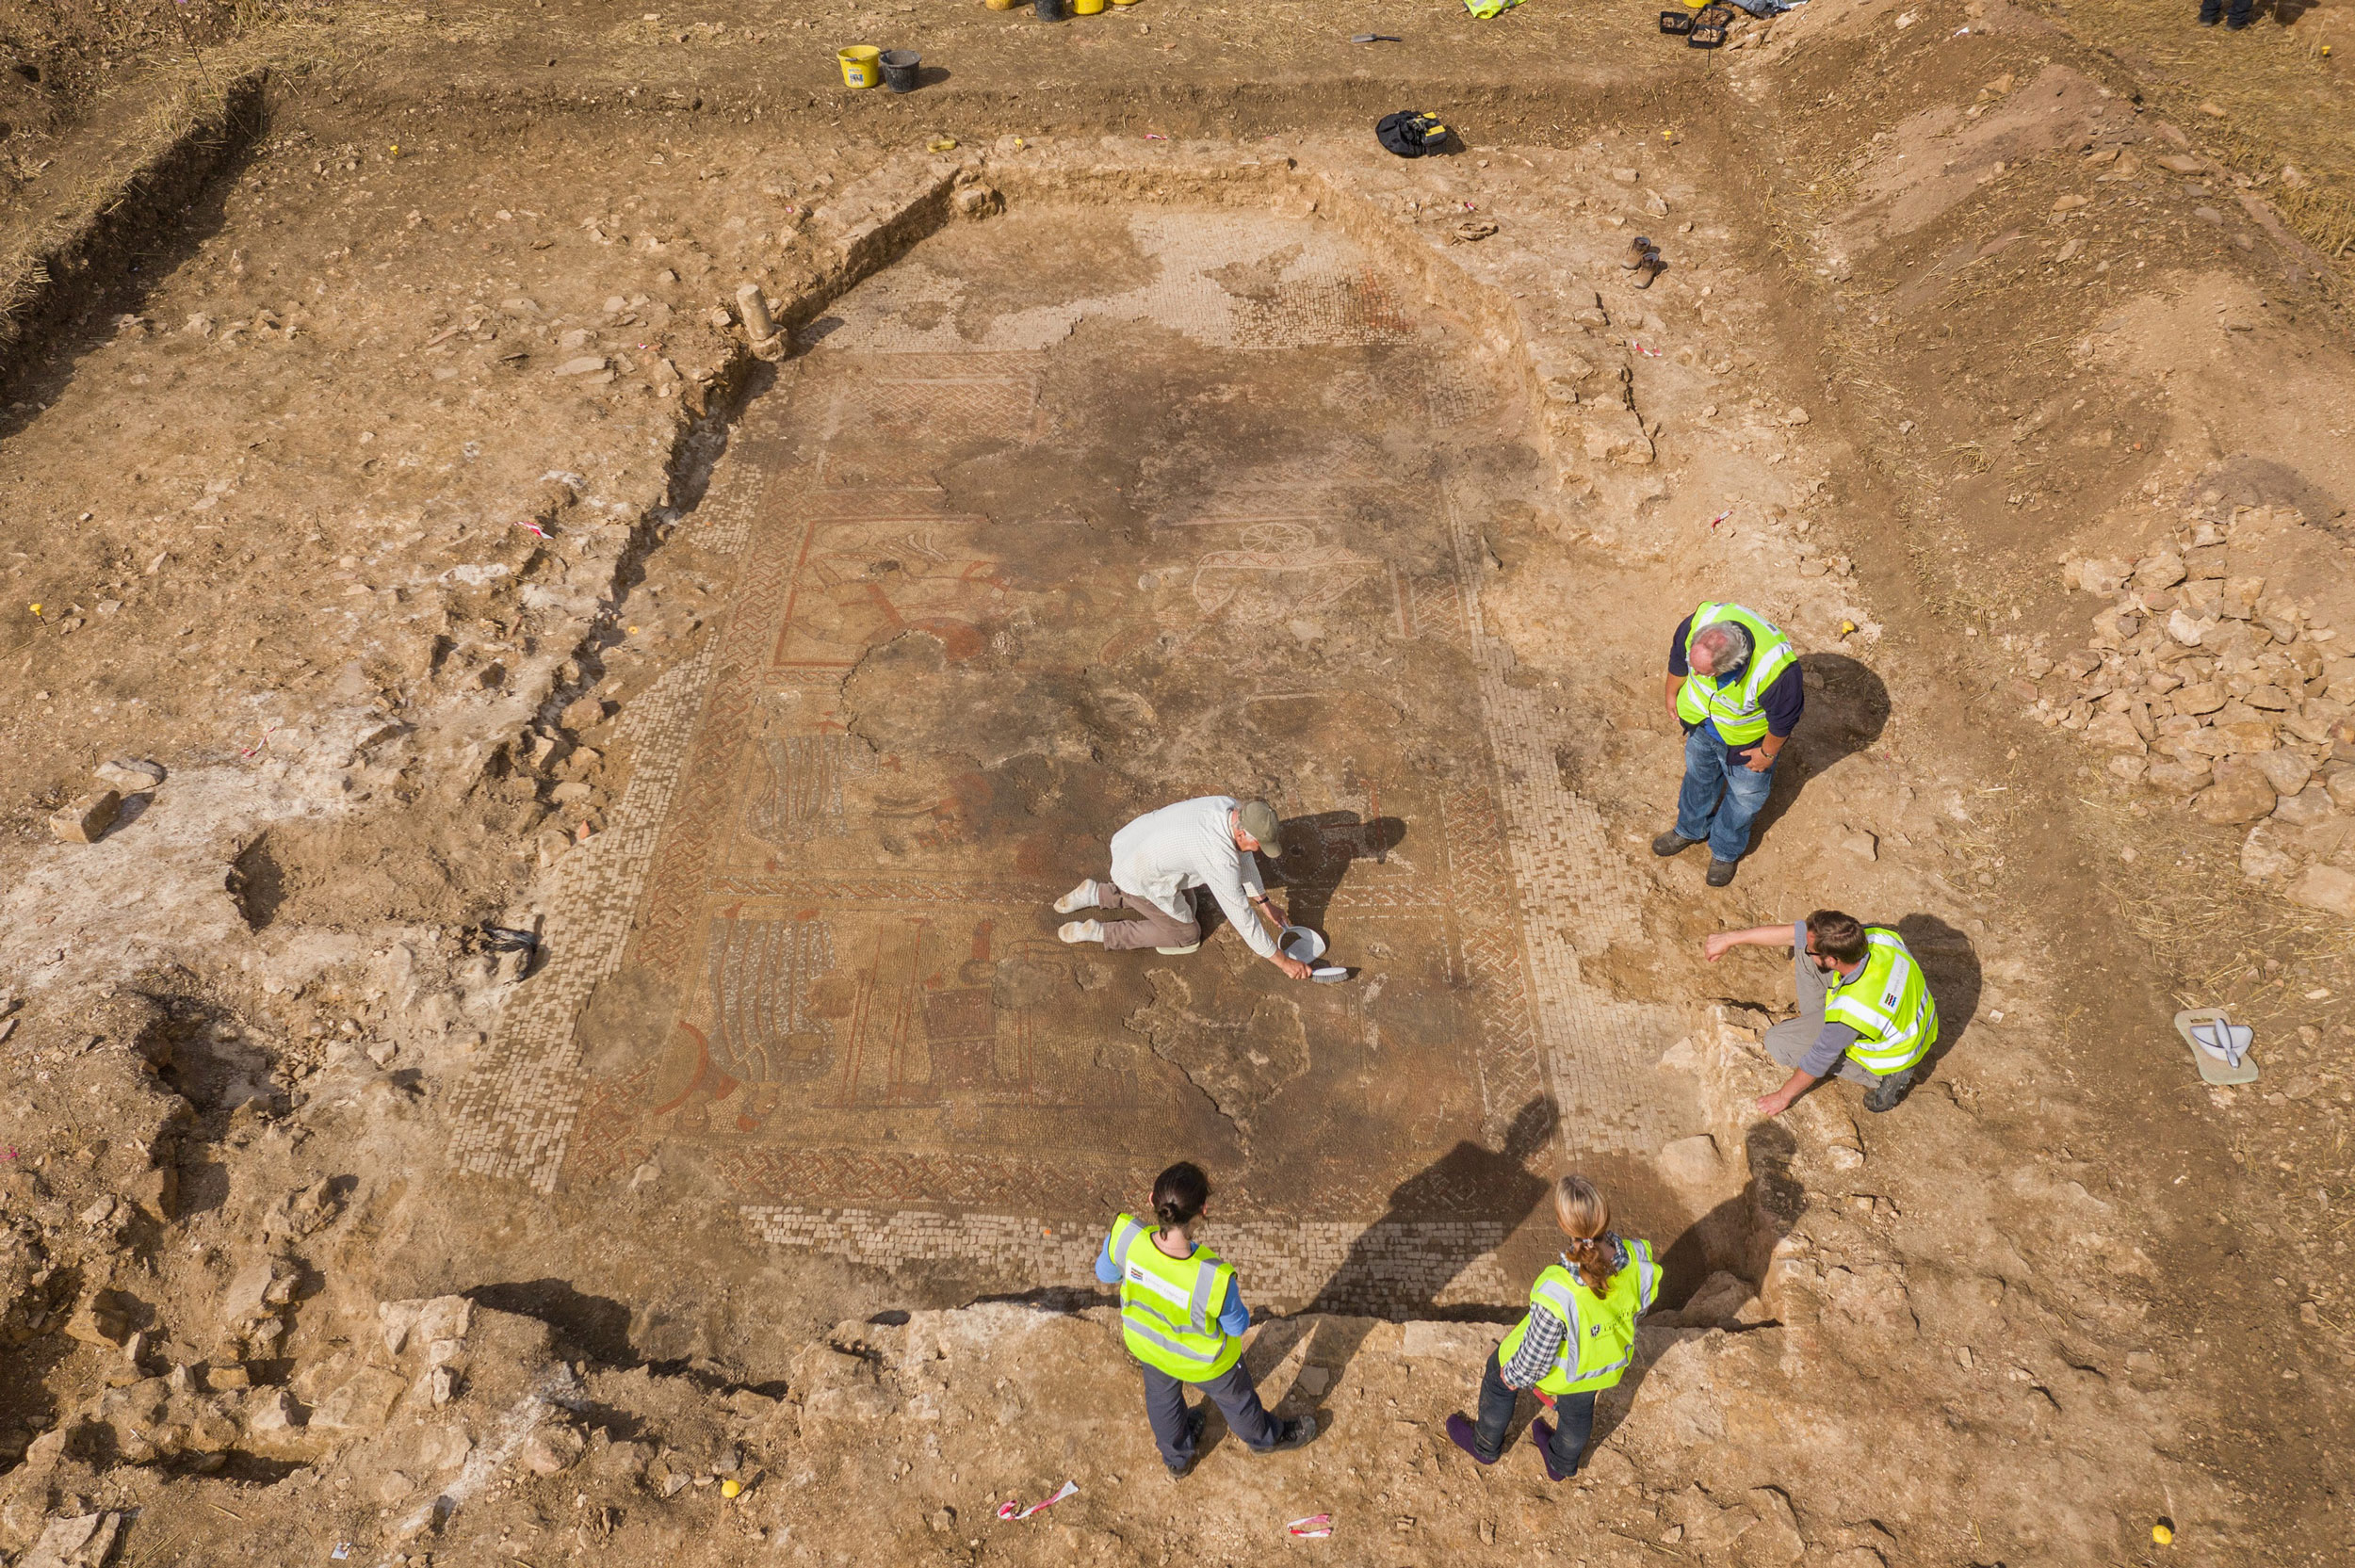 Aerial view of the site and archaeologists at work.